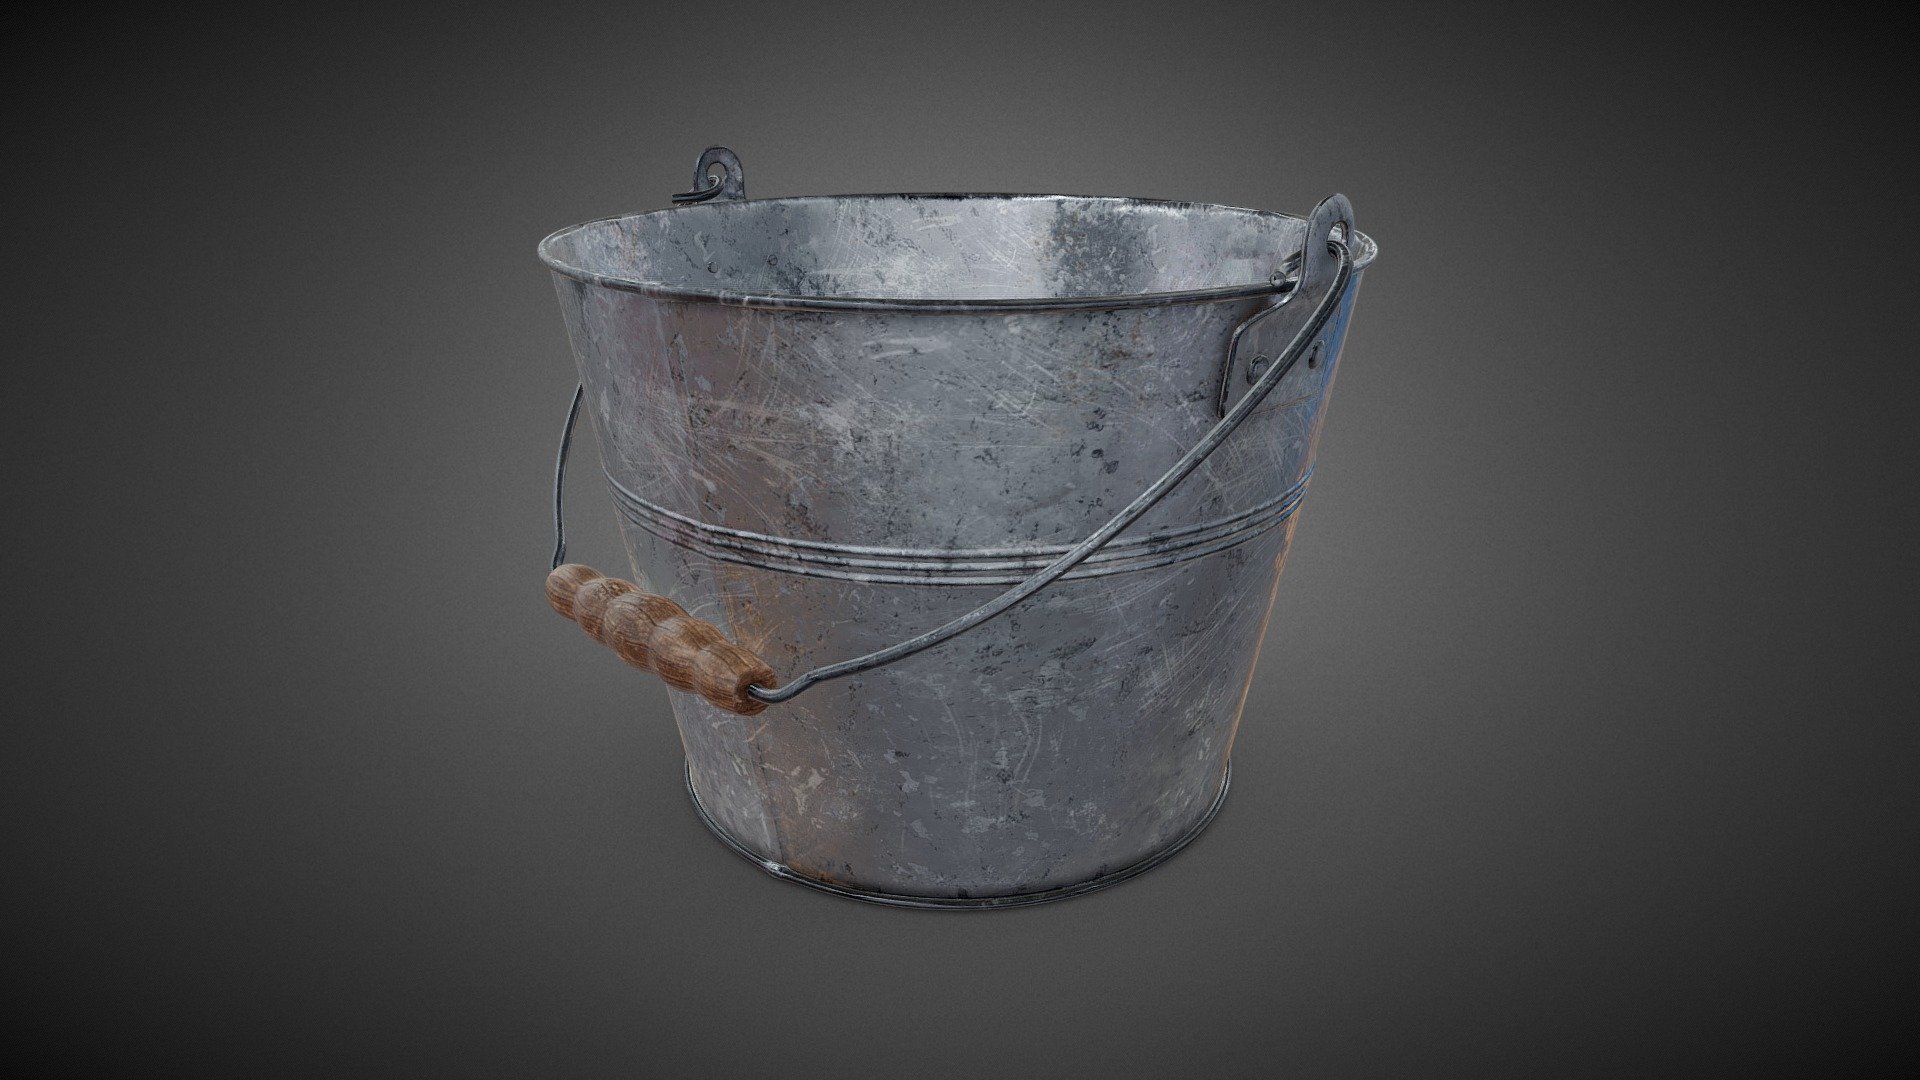 Tin bucket 3D model  Subdivision ready model of a tin bucket  includes:  2k pbr textures (metal/rough)  Blender scene file with Cycles PBR materials 3d model